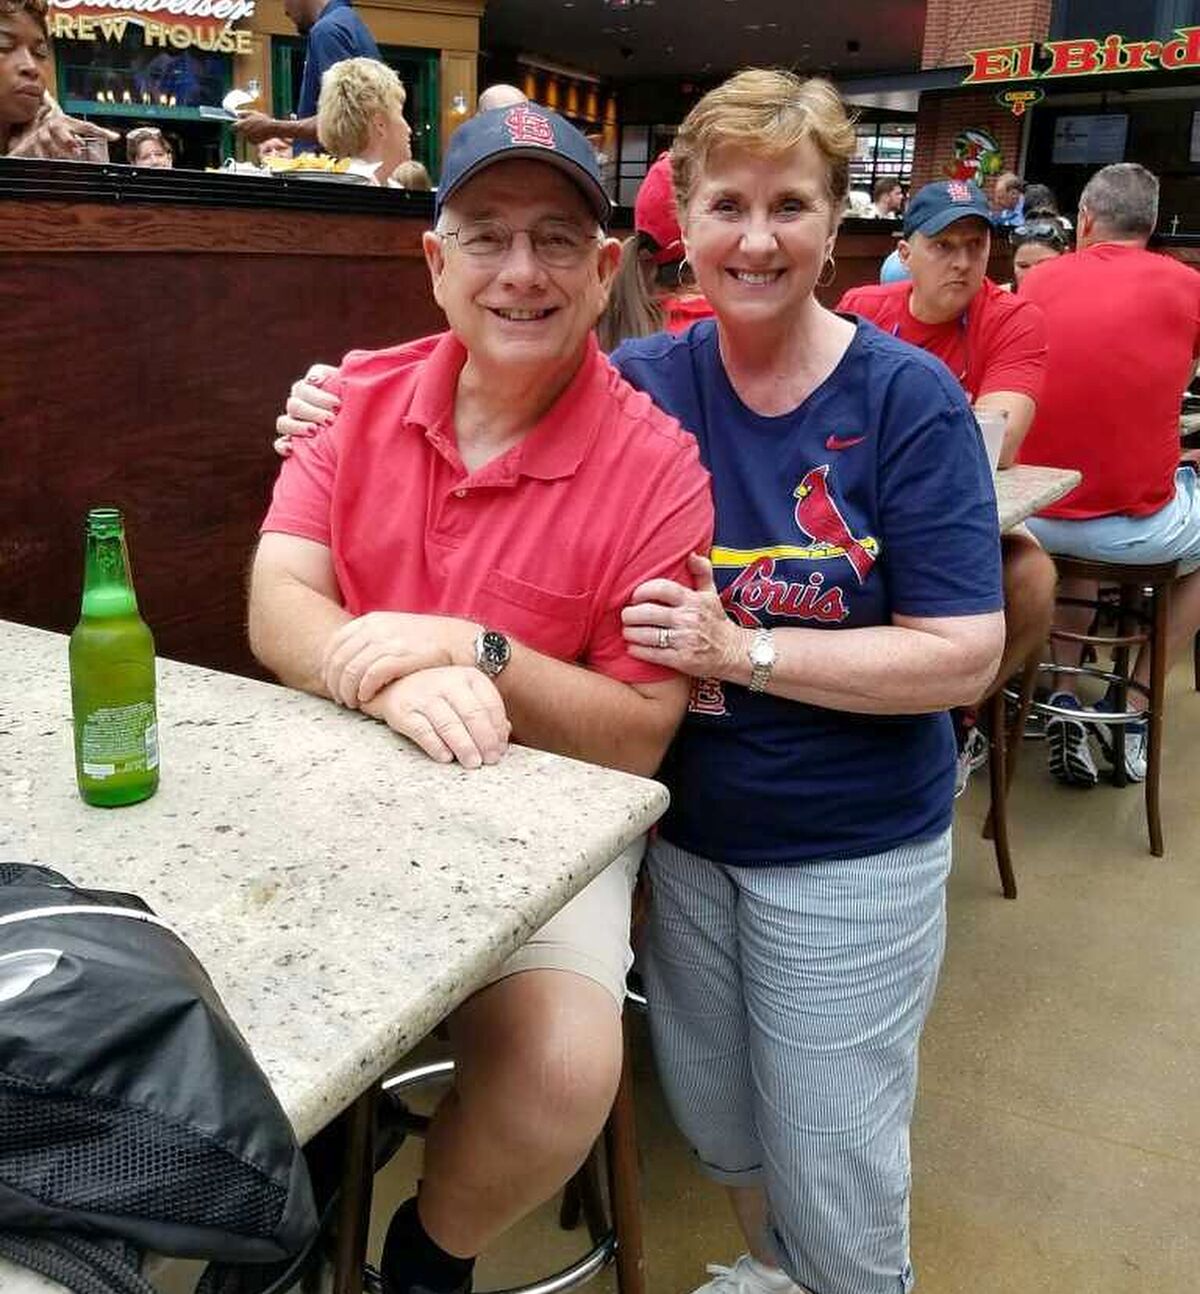 A couple in St. Louis Cardinals gear pose for a photo in a food court.